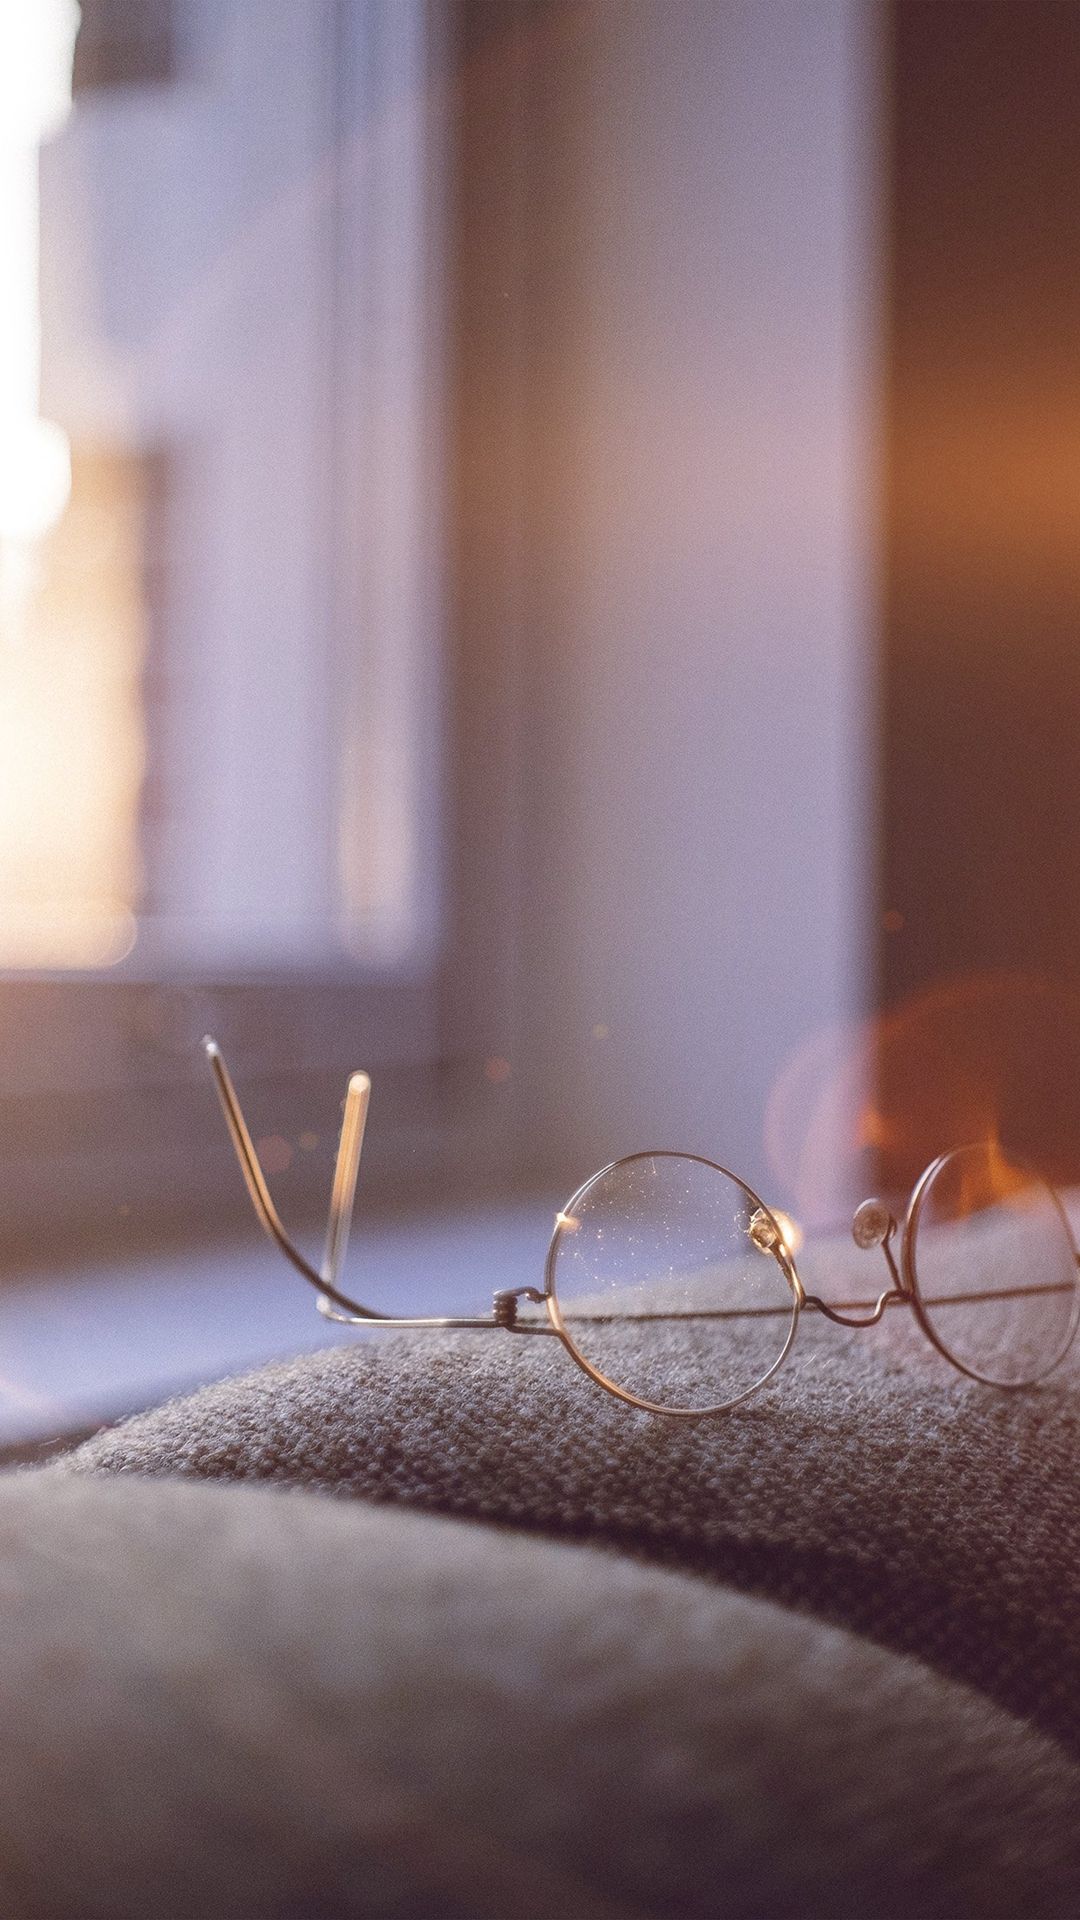 Lonely Quiet Day Home Glasses Sunlight Flare #iPhone #wallpaper. Cool wallpaper for phones, Live wallpaper iphone, iPhone 6 plus wallpaper